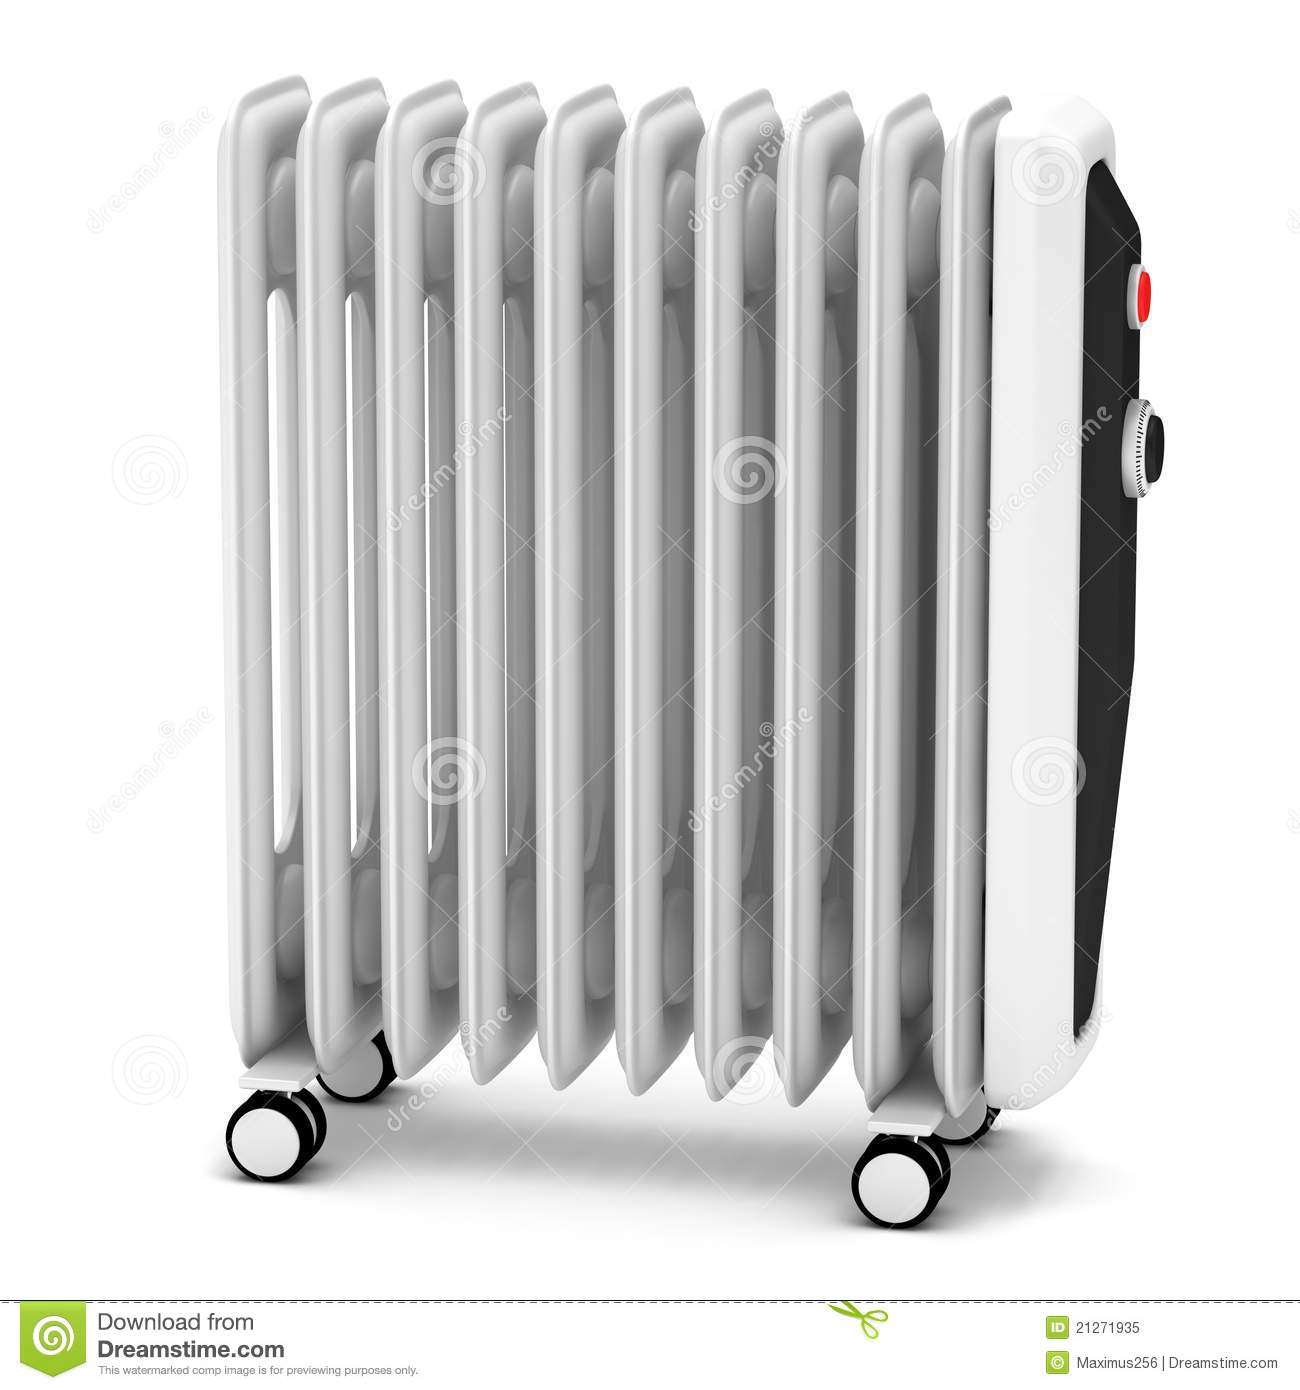 Electric Oil Heater Royalty Free Stock Photo   Image  21271935